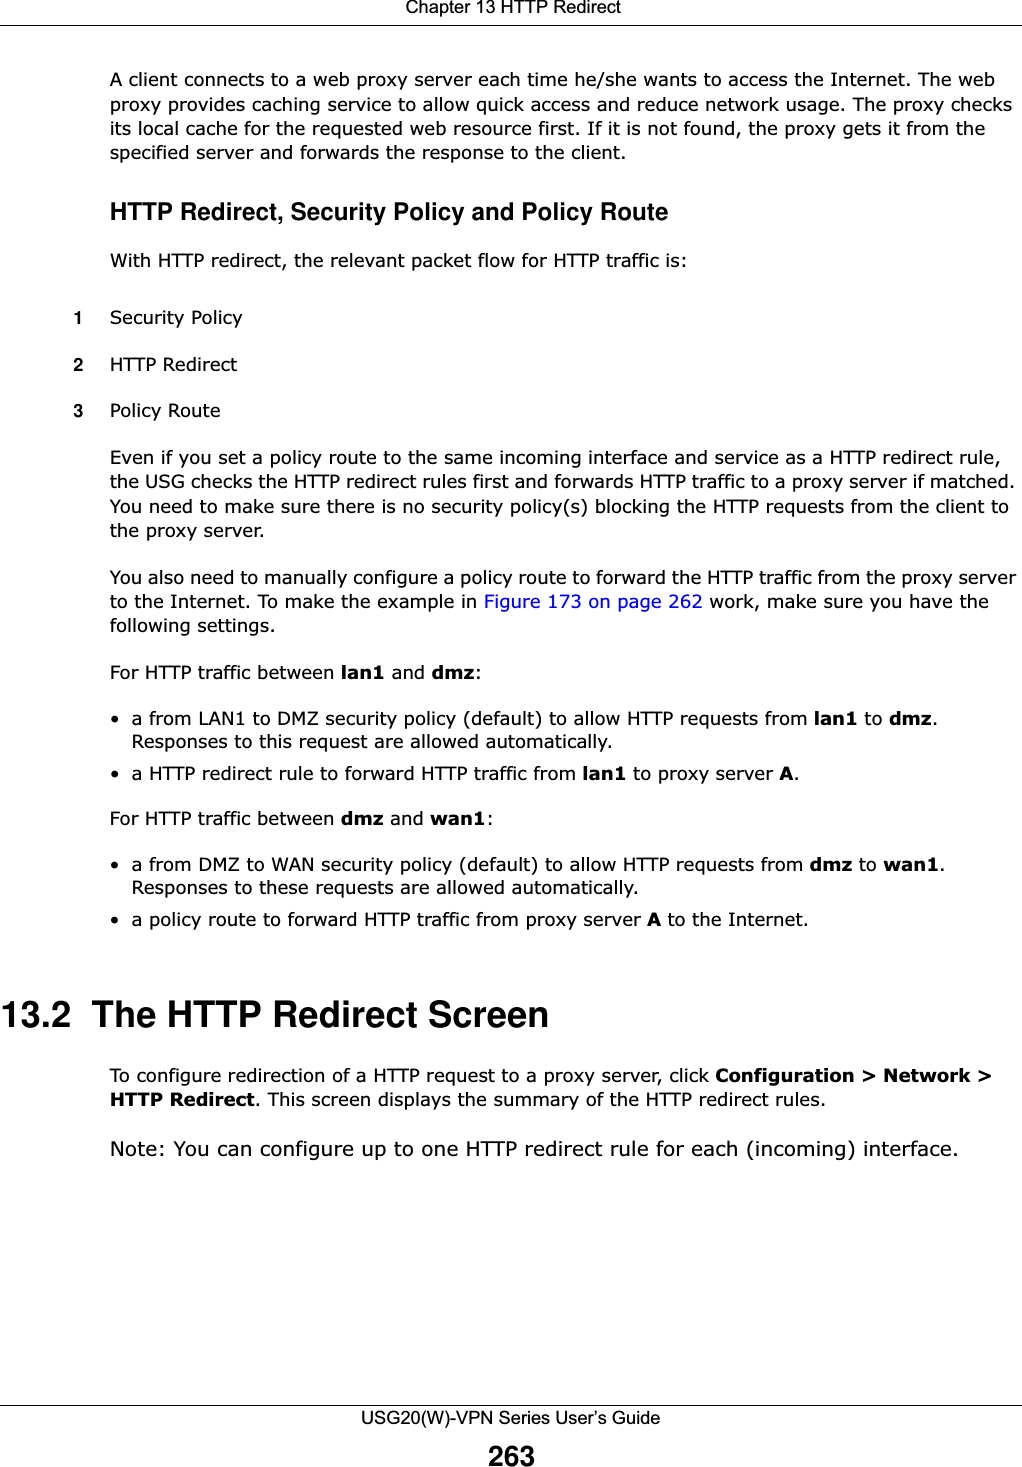  Chapter 13 HTTP RedirectUSG20(W)-VPN Series User’s Guide263A client connects to a web proxy server each time he/she wants to access the Internet. The web proxy provides caching service to allow quick access and reduce network usage. The proxy checks its local cache for the requested web resource first. If it is not found, the proxy gets it from the specified server and forwards the response to the client. HTTP Redirect, Security Policy and Policy RouteWith HTTP redirect, the relevant packet flow for HTTP traffic is:1Security Policy2HTTP Redirect3Policy Route Even if you set a policy route to the same incoming interface and service as a HTTP redirect rule, the USG checks the HTTP redirect rules first and forwards HTTP traffic to a proxy server if matched. You need to make sure there is no security policy(s) blocking the HTTP requests from the client to the proxy server. You also need to manually configure a policy route to forward the HTTP traffic from the proxy server to the Internet. To make the example in Figure 173 on page 262 work, make sure you have the following settings.For HTTP traffic between lan1 and dmz: • a from LAN1 to DMZ security policy (default) to allow HTTP requests from lan1 to dmz. Responses to this request are allowed automatically.• a HTTP redirect rule to forward HTTP traffic from lan1 to proxy server A. For HTTP traffic between dmz and wan1:• a from DMZ to WAN security policy (default) to allow HTTP requests from dmz to wan1. Responses to these requests are allowed automatically.• a policy route to forward HTTP traffic from proxy server A to the Internet.13.2  The HTTP Redirect ScreenTo configure redirection of a HTTP request to a proxy server, click Configuration &gt; Network &gt; HTTP Redirect. This screen displays the summary of the HTTP redirect rules.Note: You can configure up to one HTTP redirect rule for each (incoming) interface.